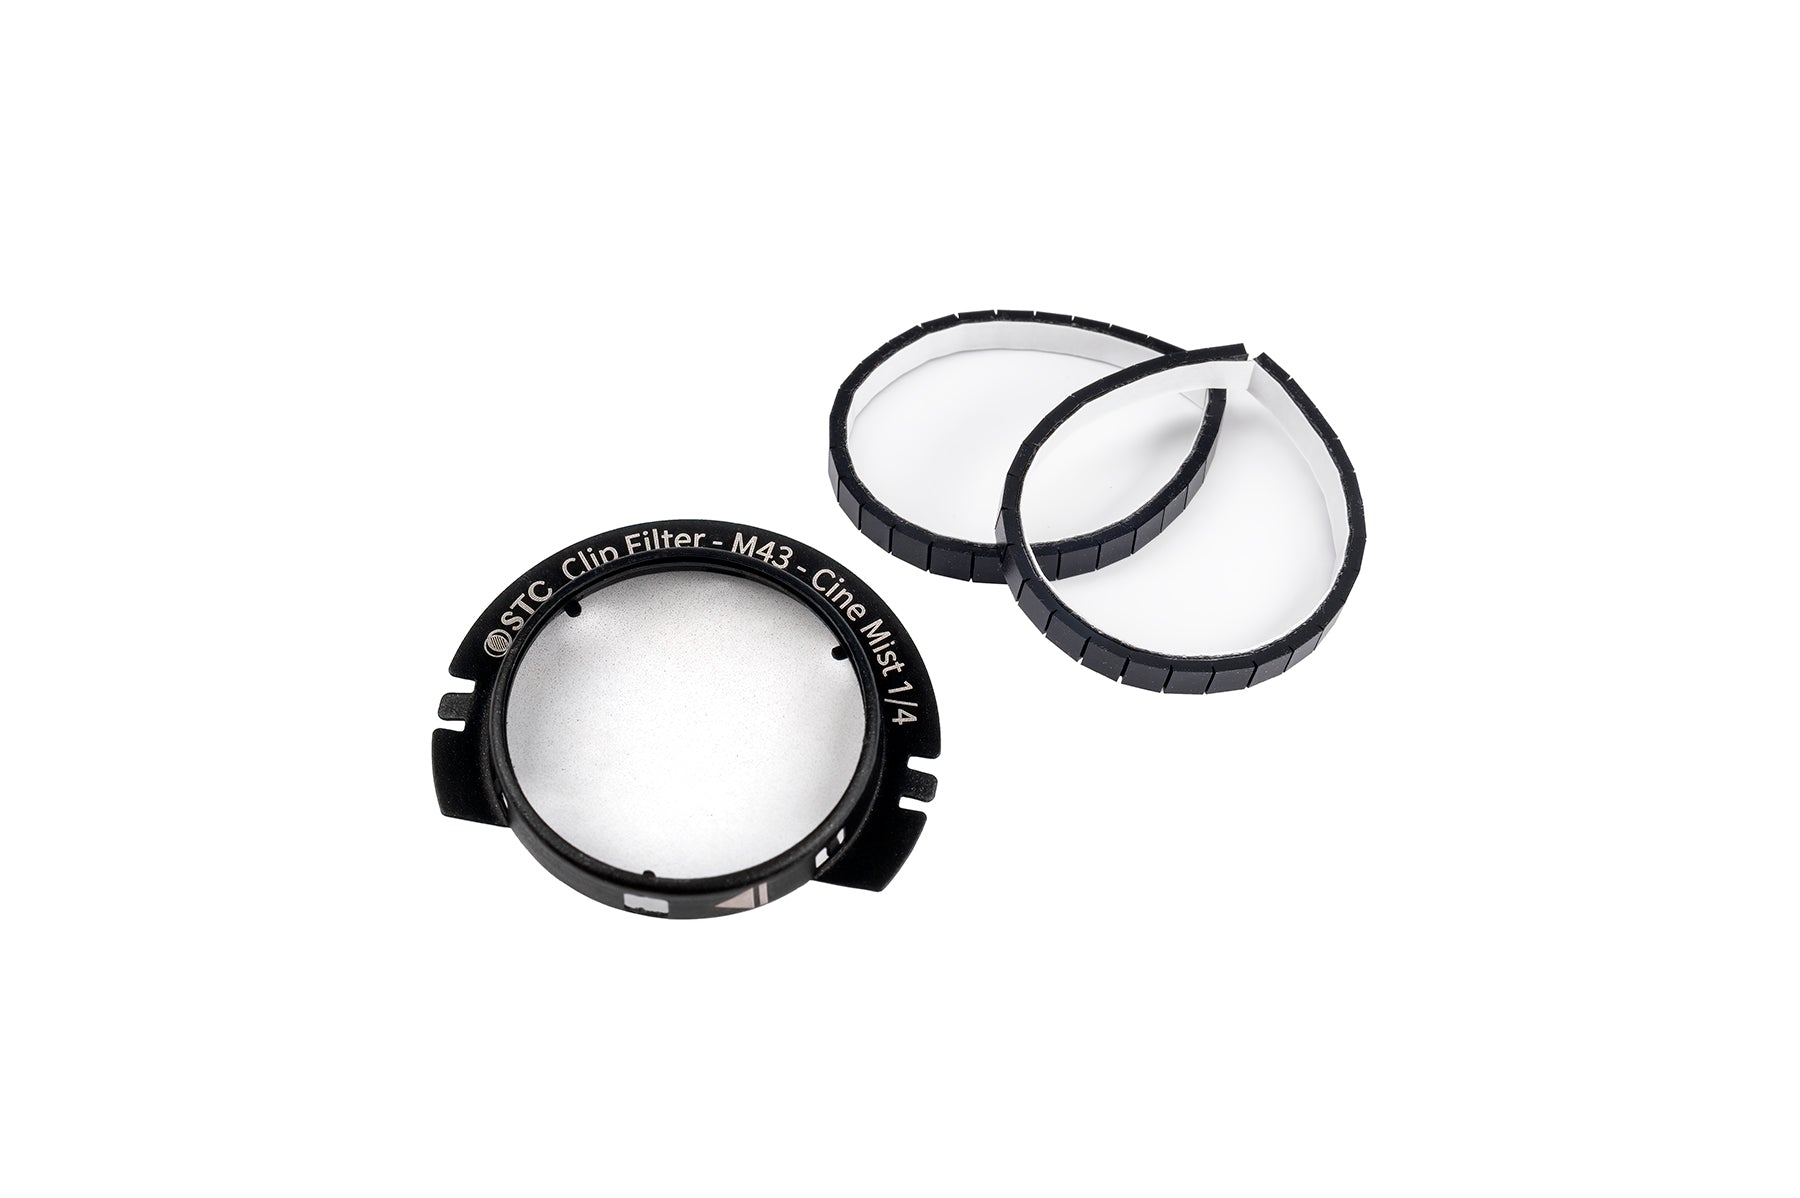 Cine Mist Cilp Filter for Olympus Micro Four Thirds Cameras